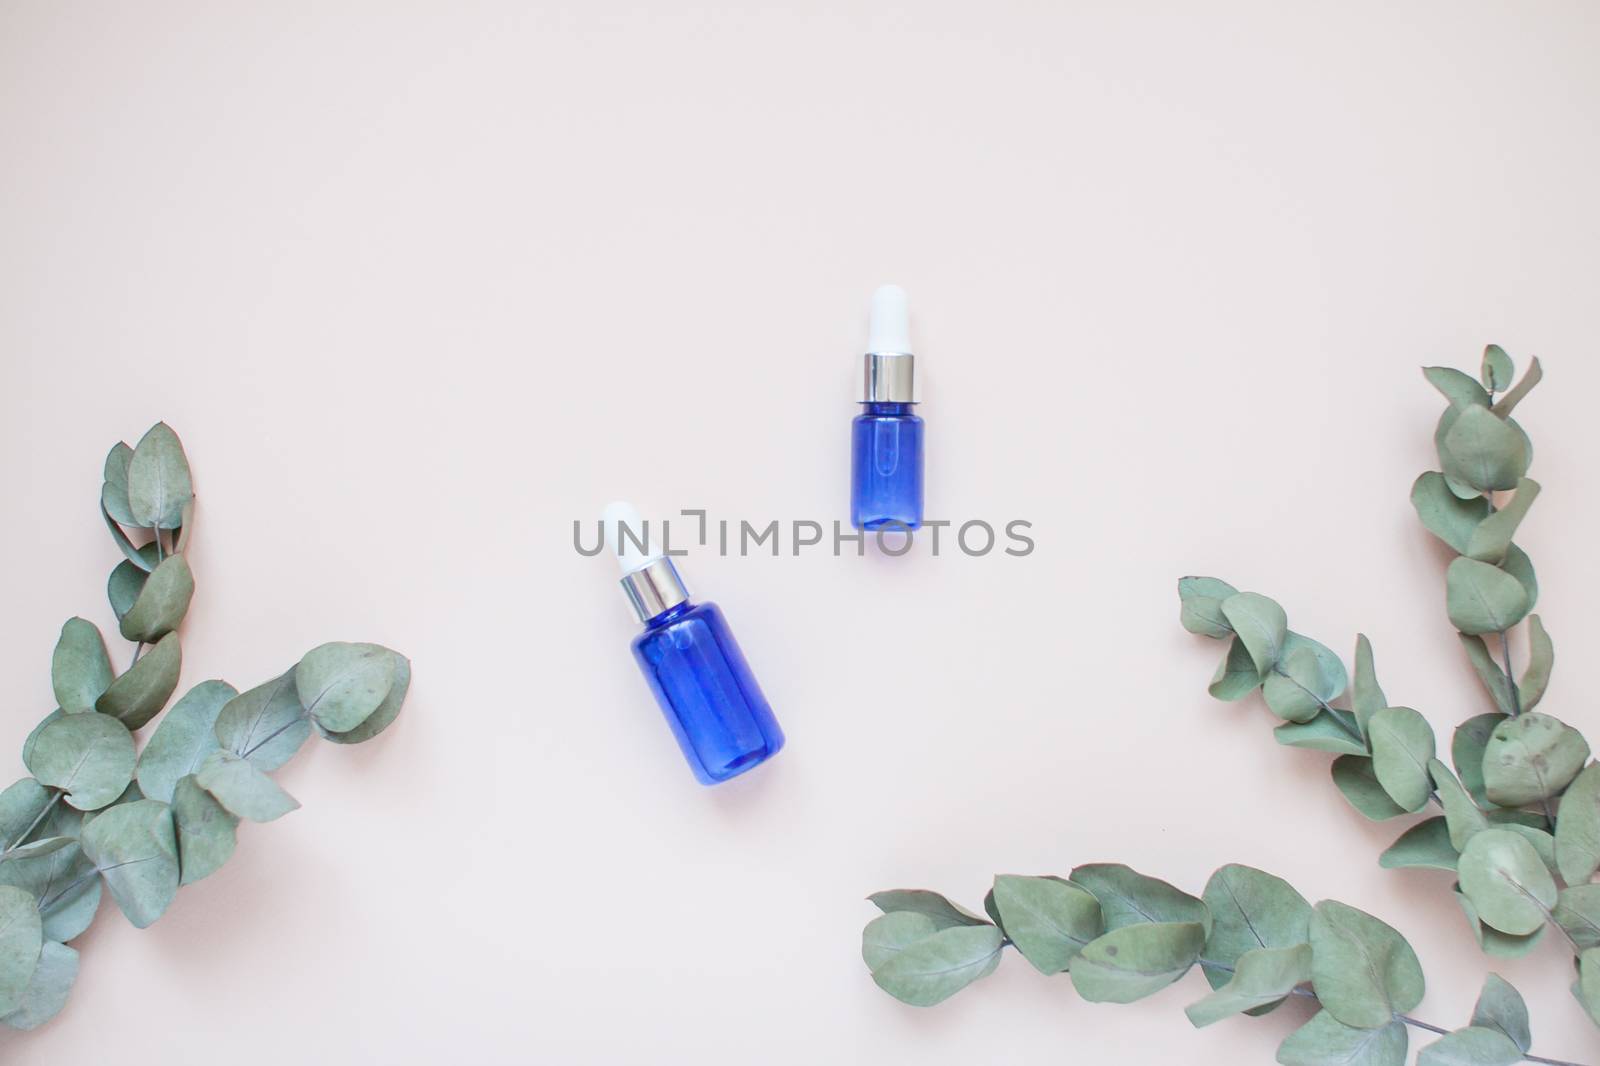 Bottles with face serum on a light background. Beauty industry. Layout